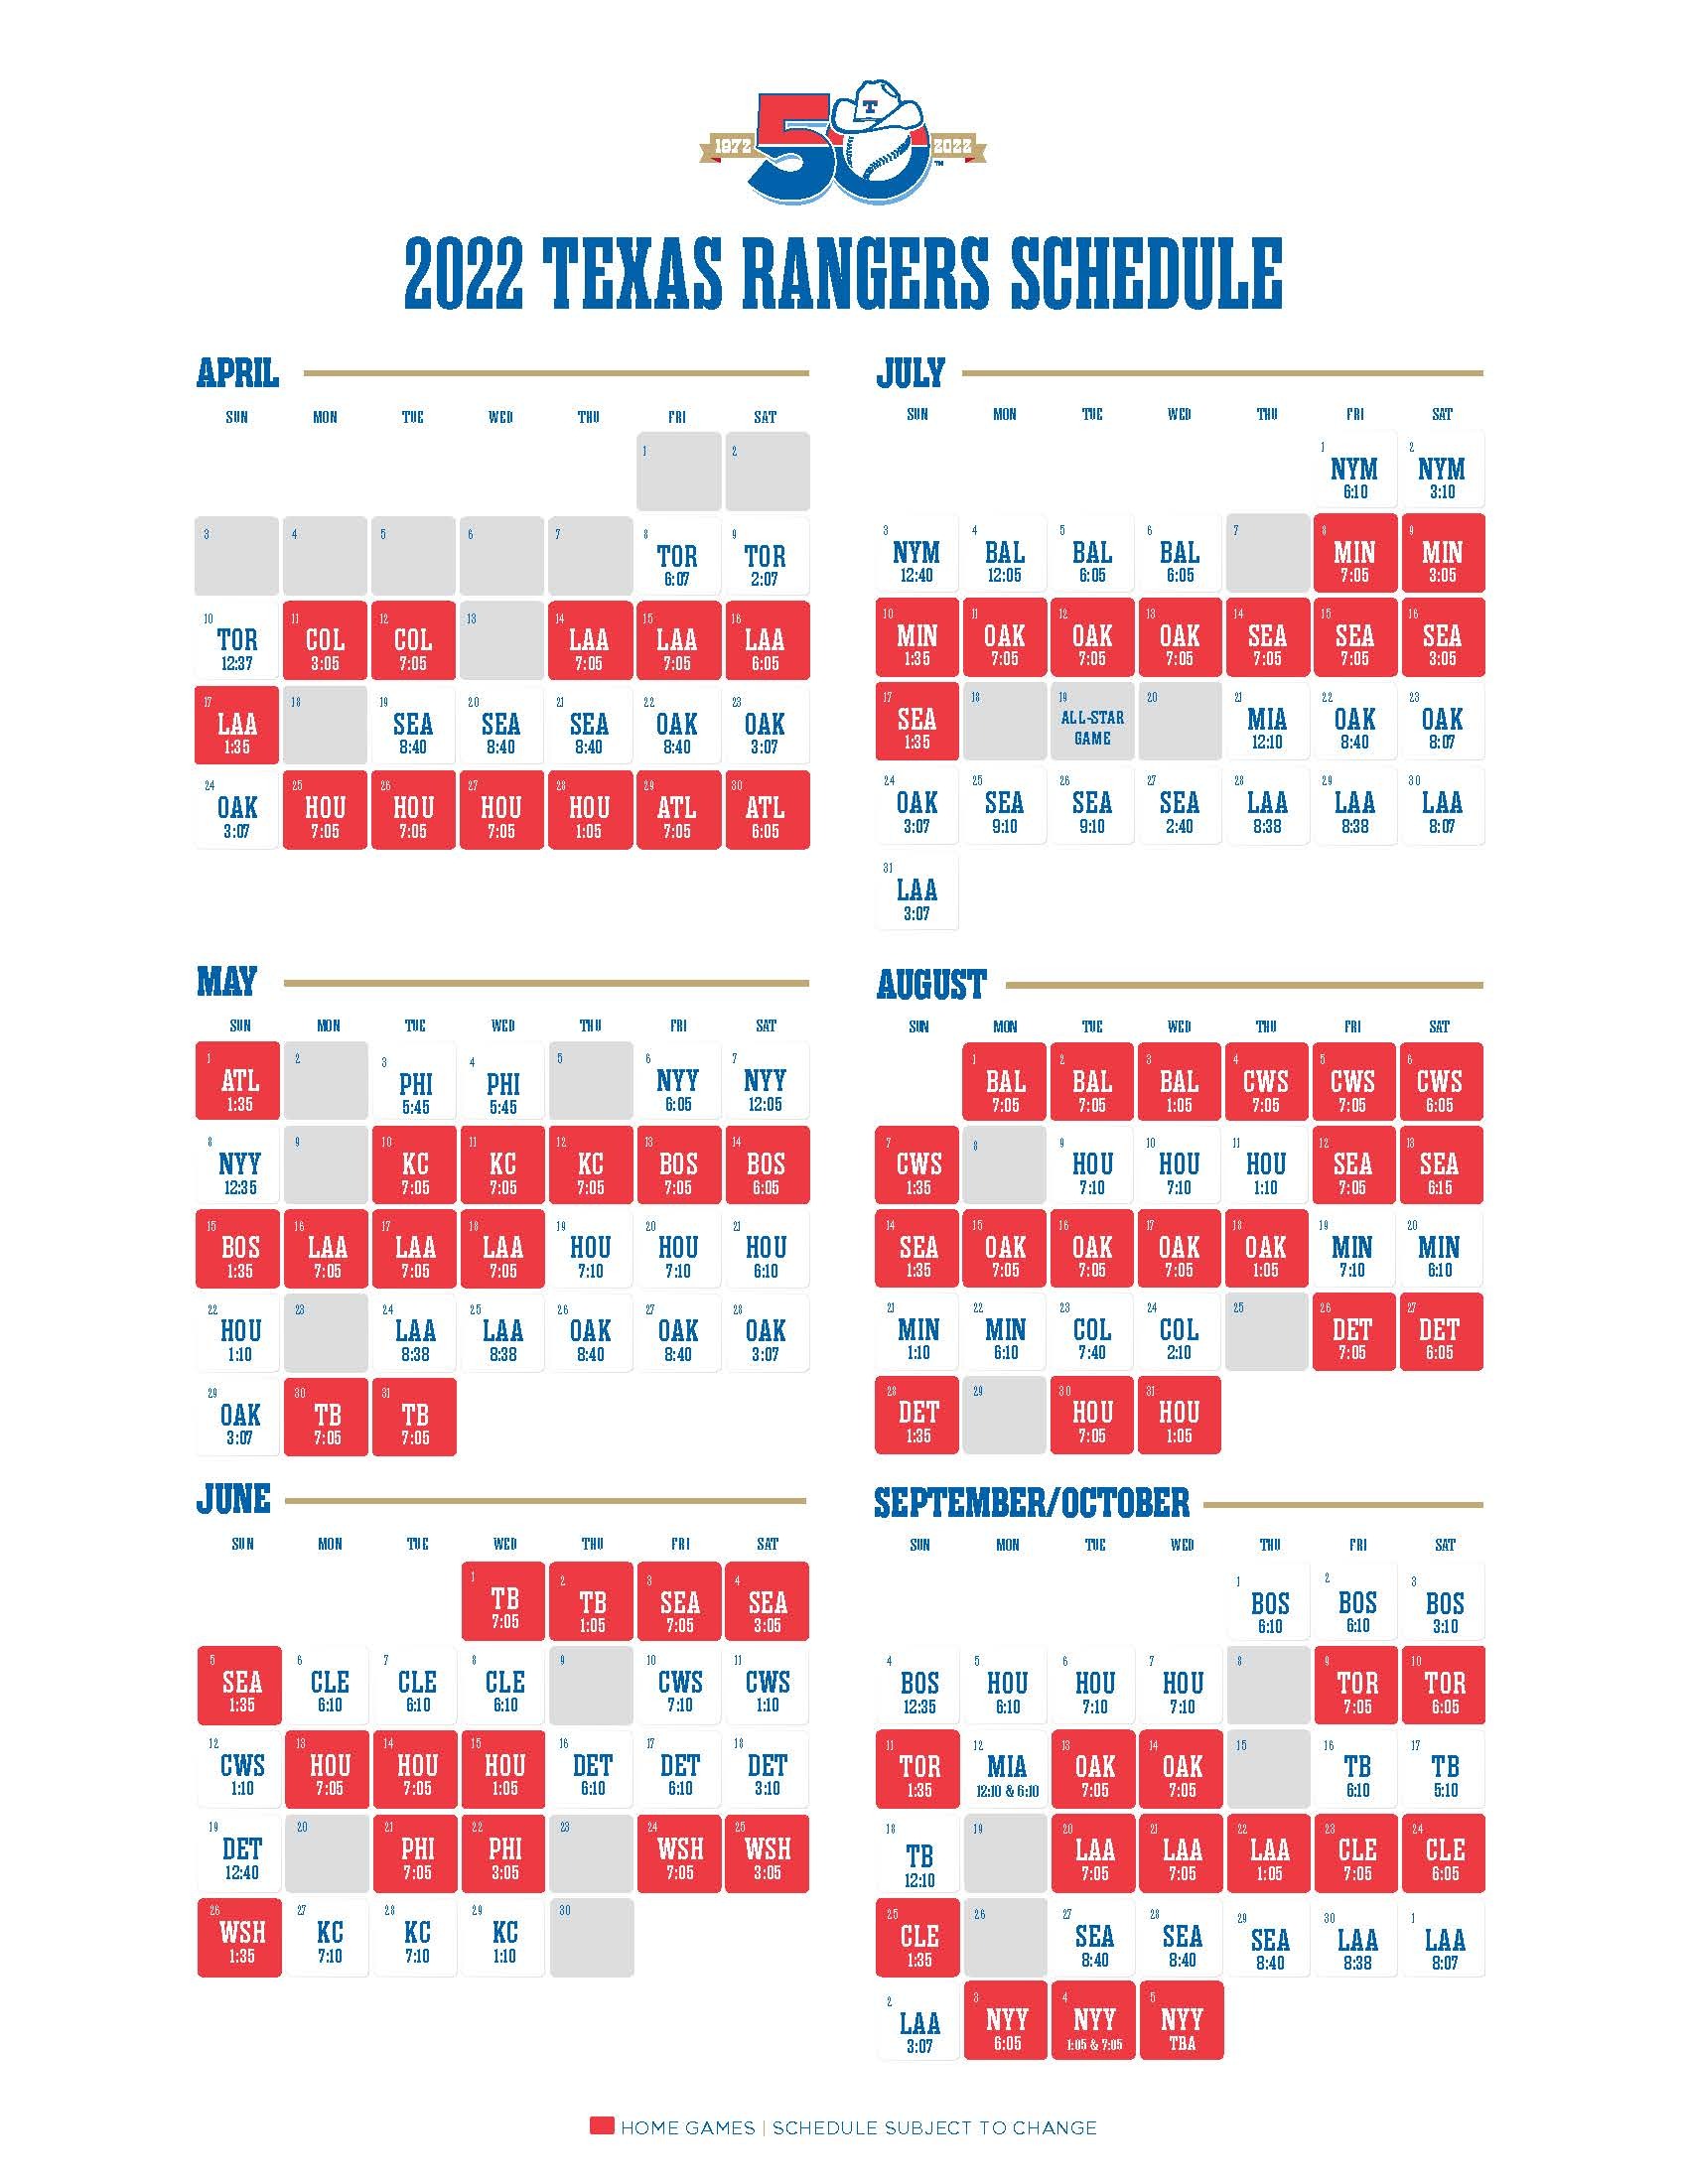 Rangers' reconfigured 2022 schedule moves Yankees from start to